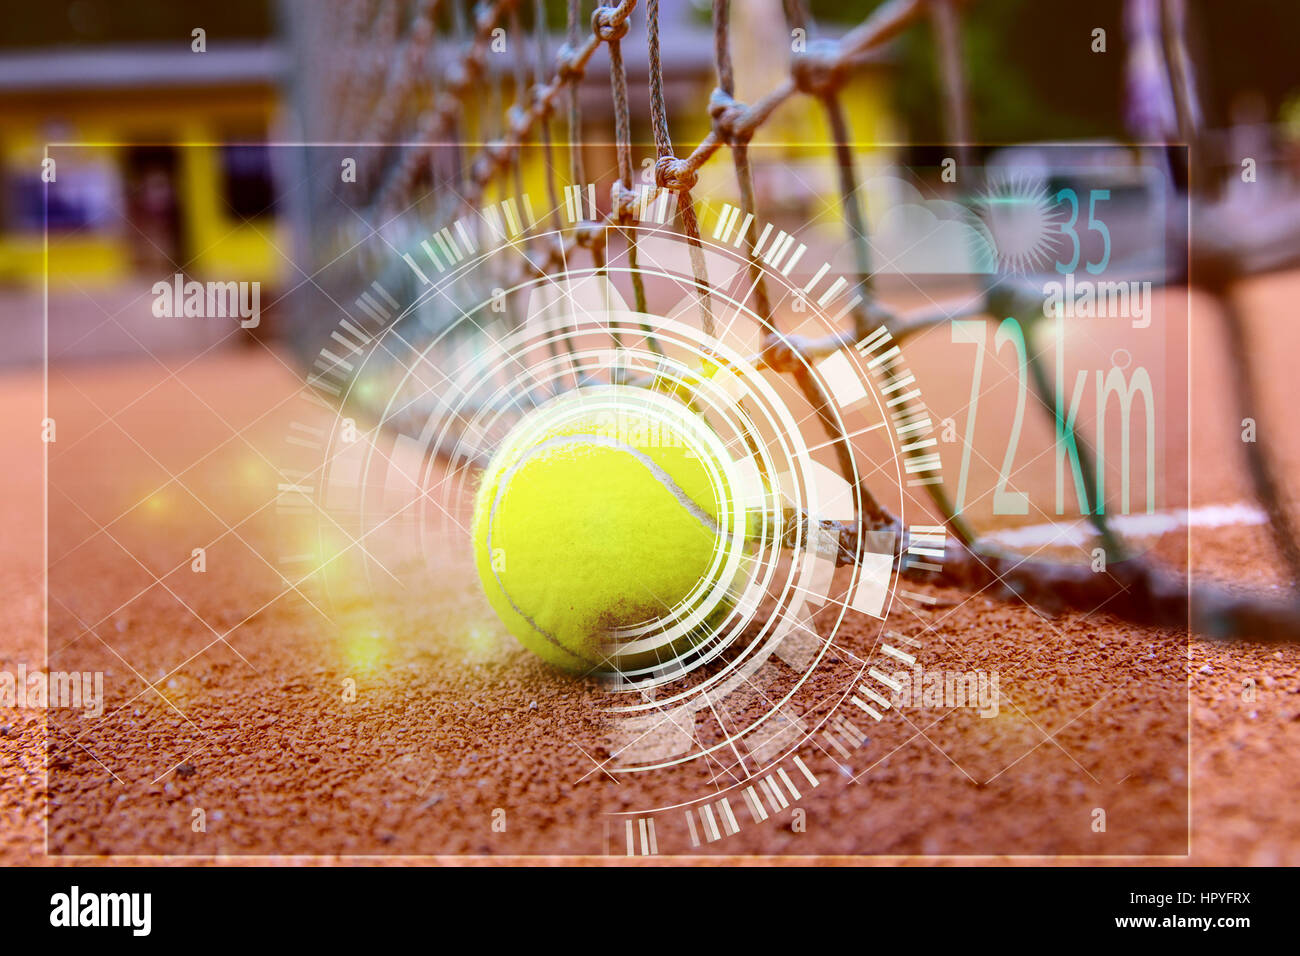 tennis ball and tennis racket on a tennis court with blurred background. with HUD interface elements, virtual futuristic techno elements Stock Photo